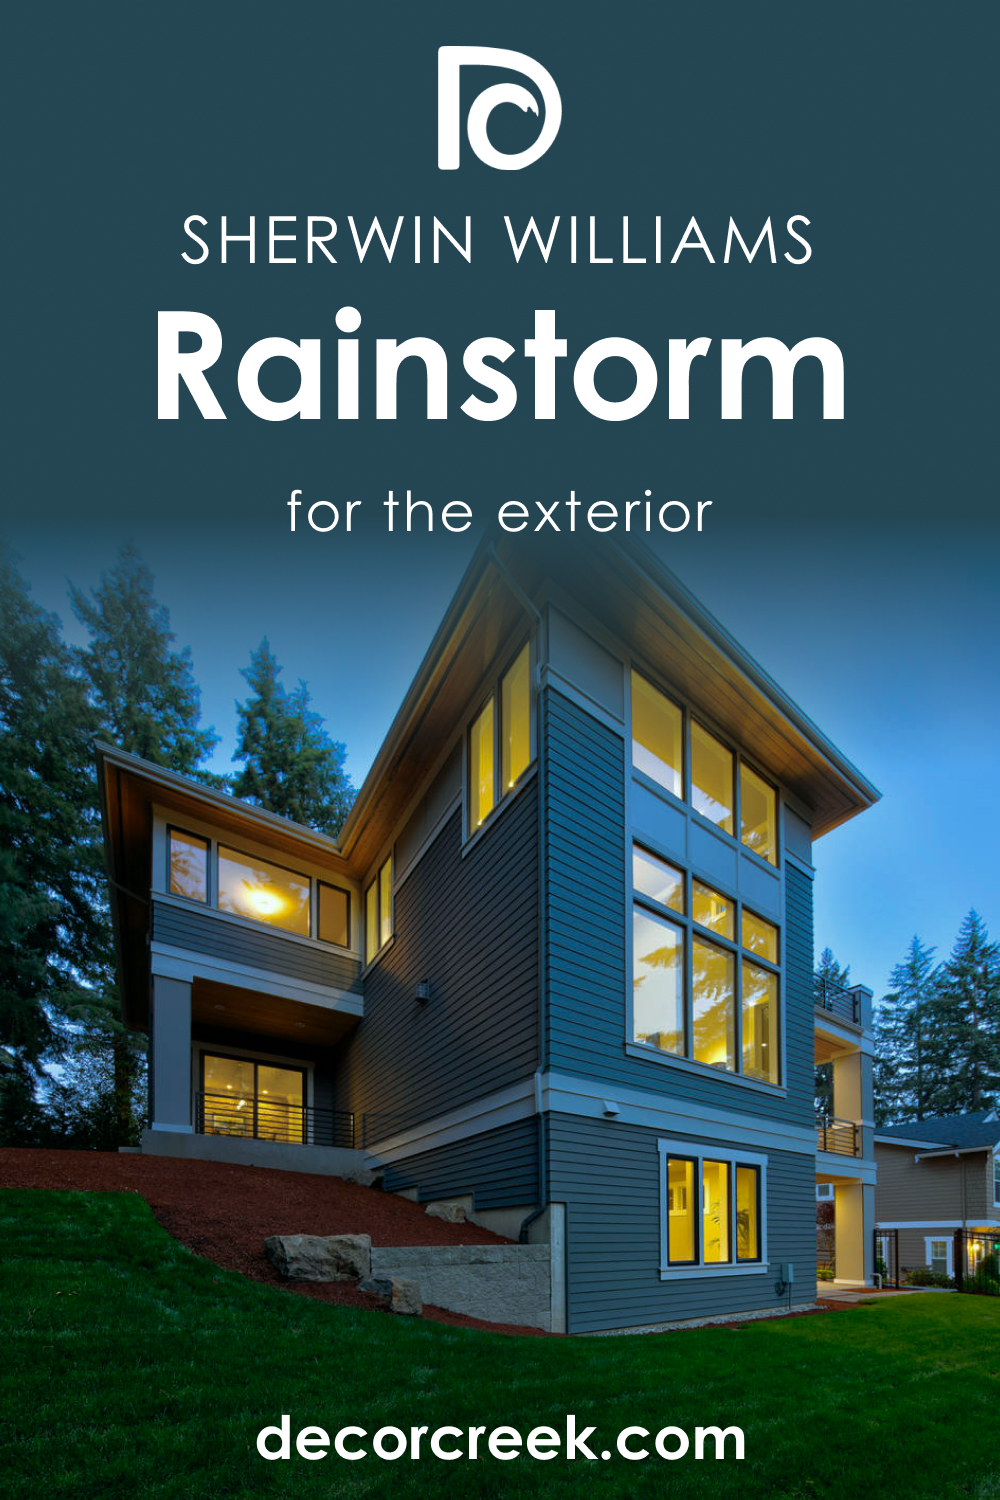 How to Use SW 6230 Rainstorm for an Exterior?